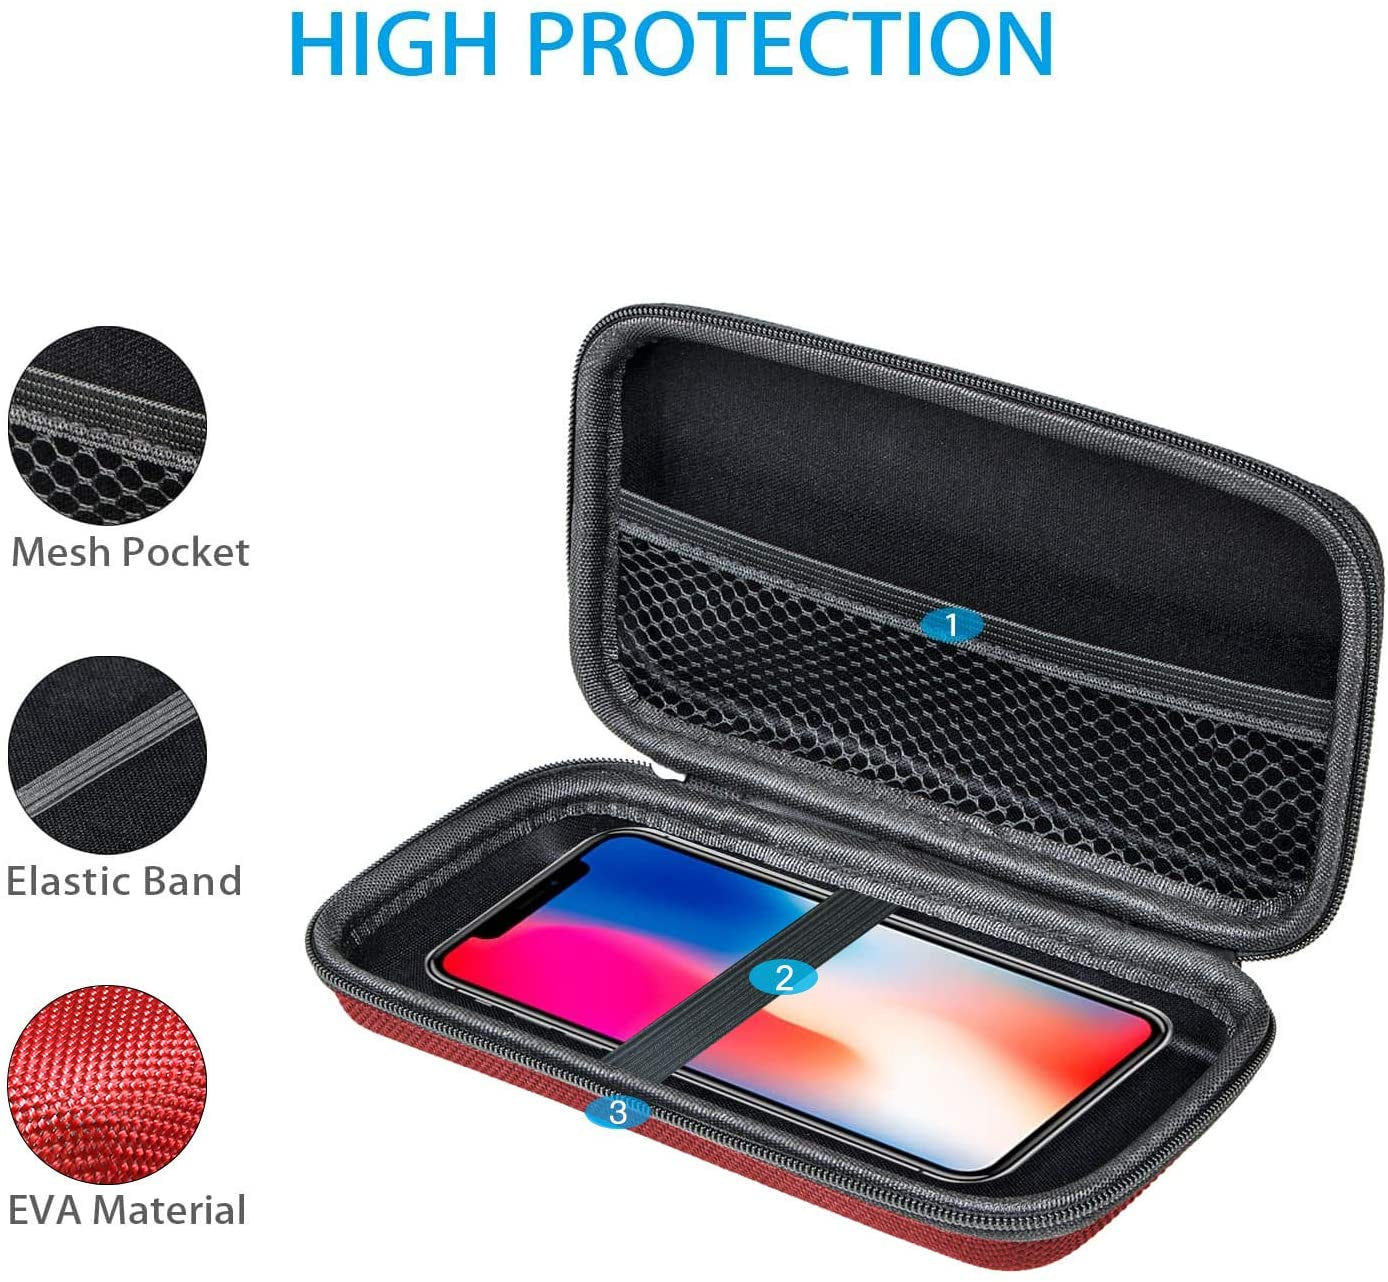 Hard Protective Travel Case,  Electronic Organizer for Anker/Jackery/Ravpower Power Bank, Shockproof EVA Carrying Case for Cell Phones, Travel Gadgets for Cables, Car/Gps Accessories